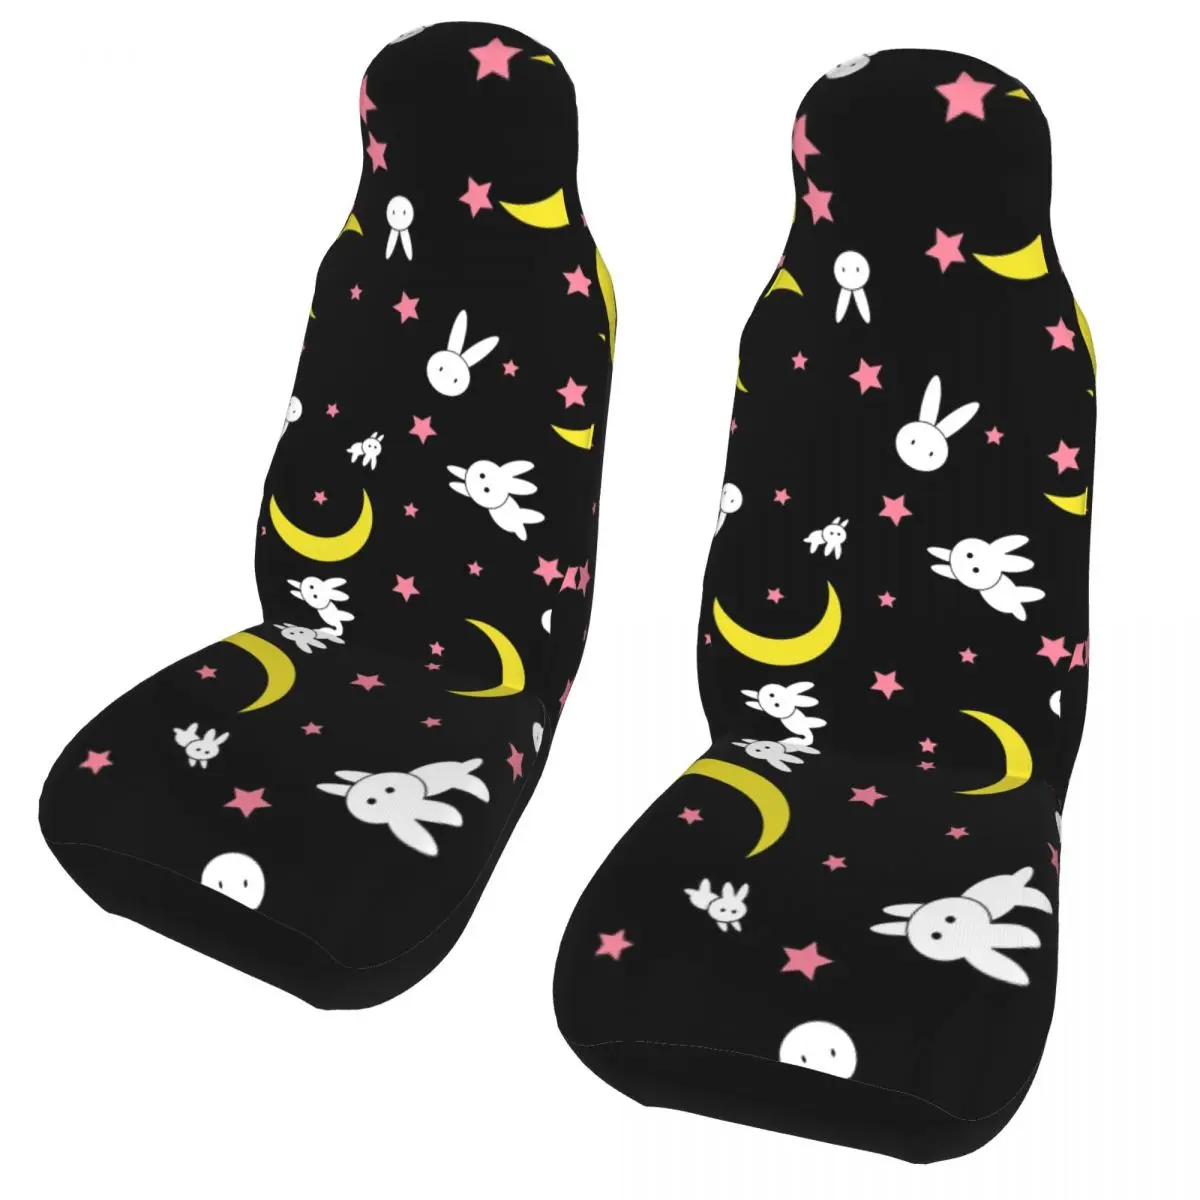 

Moon Pattern Car Seat Cover Kawaii Anime Automobiles Seat Covers Fit for Cars Trucks SUV or Van Auto Protector Accessories 2PC